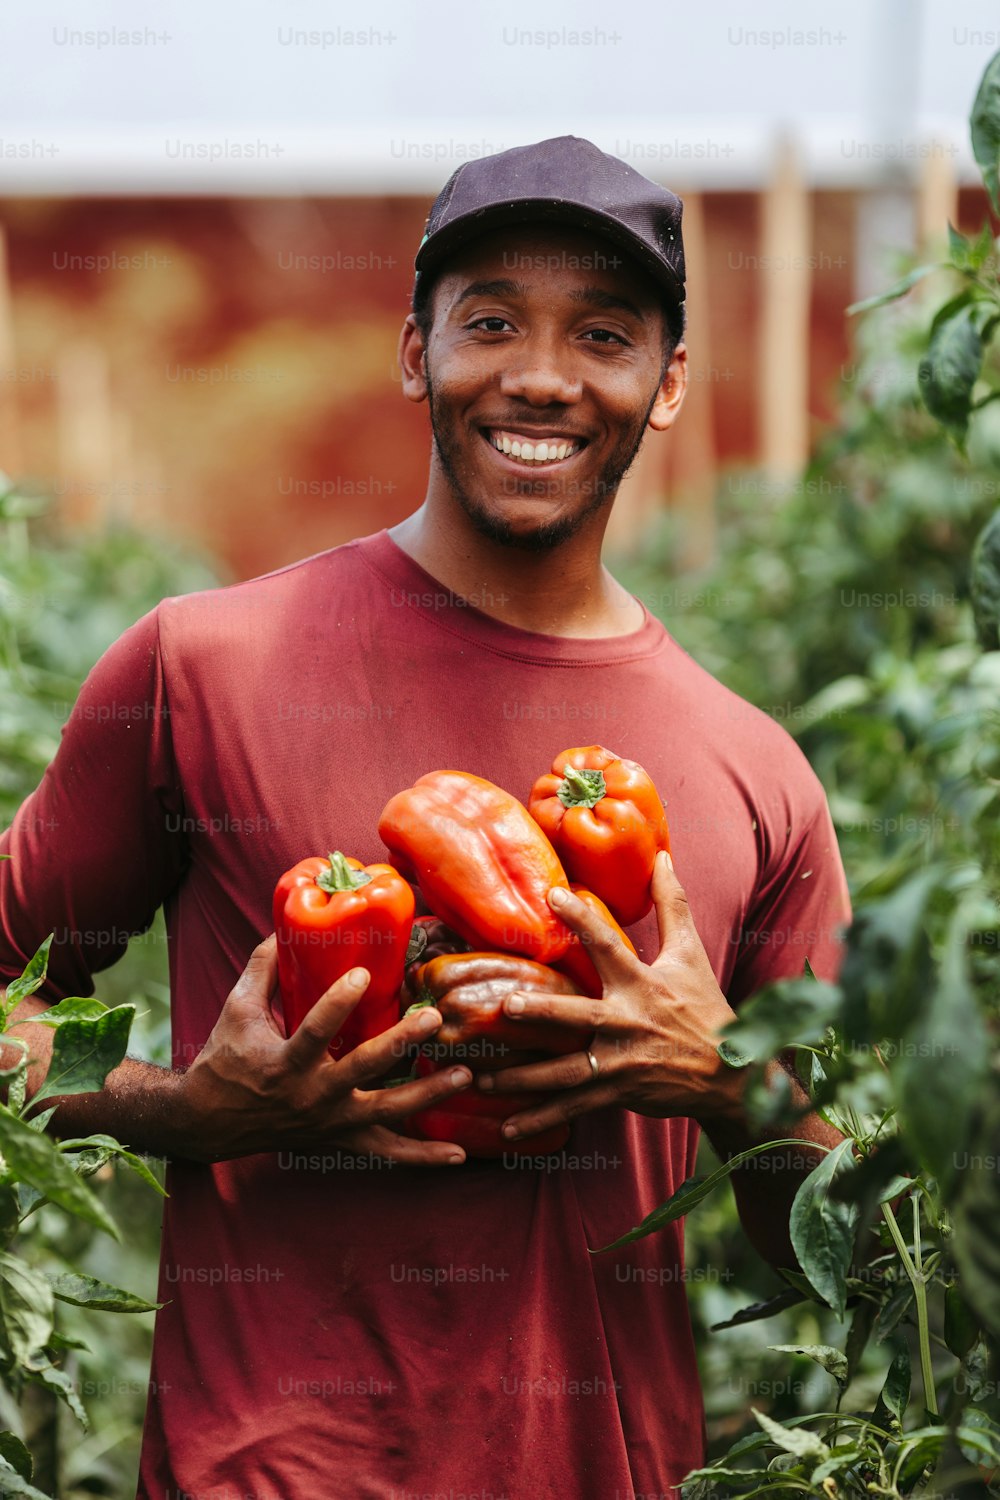 a man holding a basket of tomatoes in a field